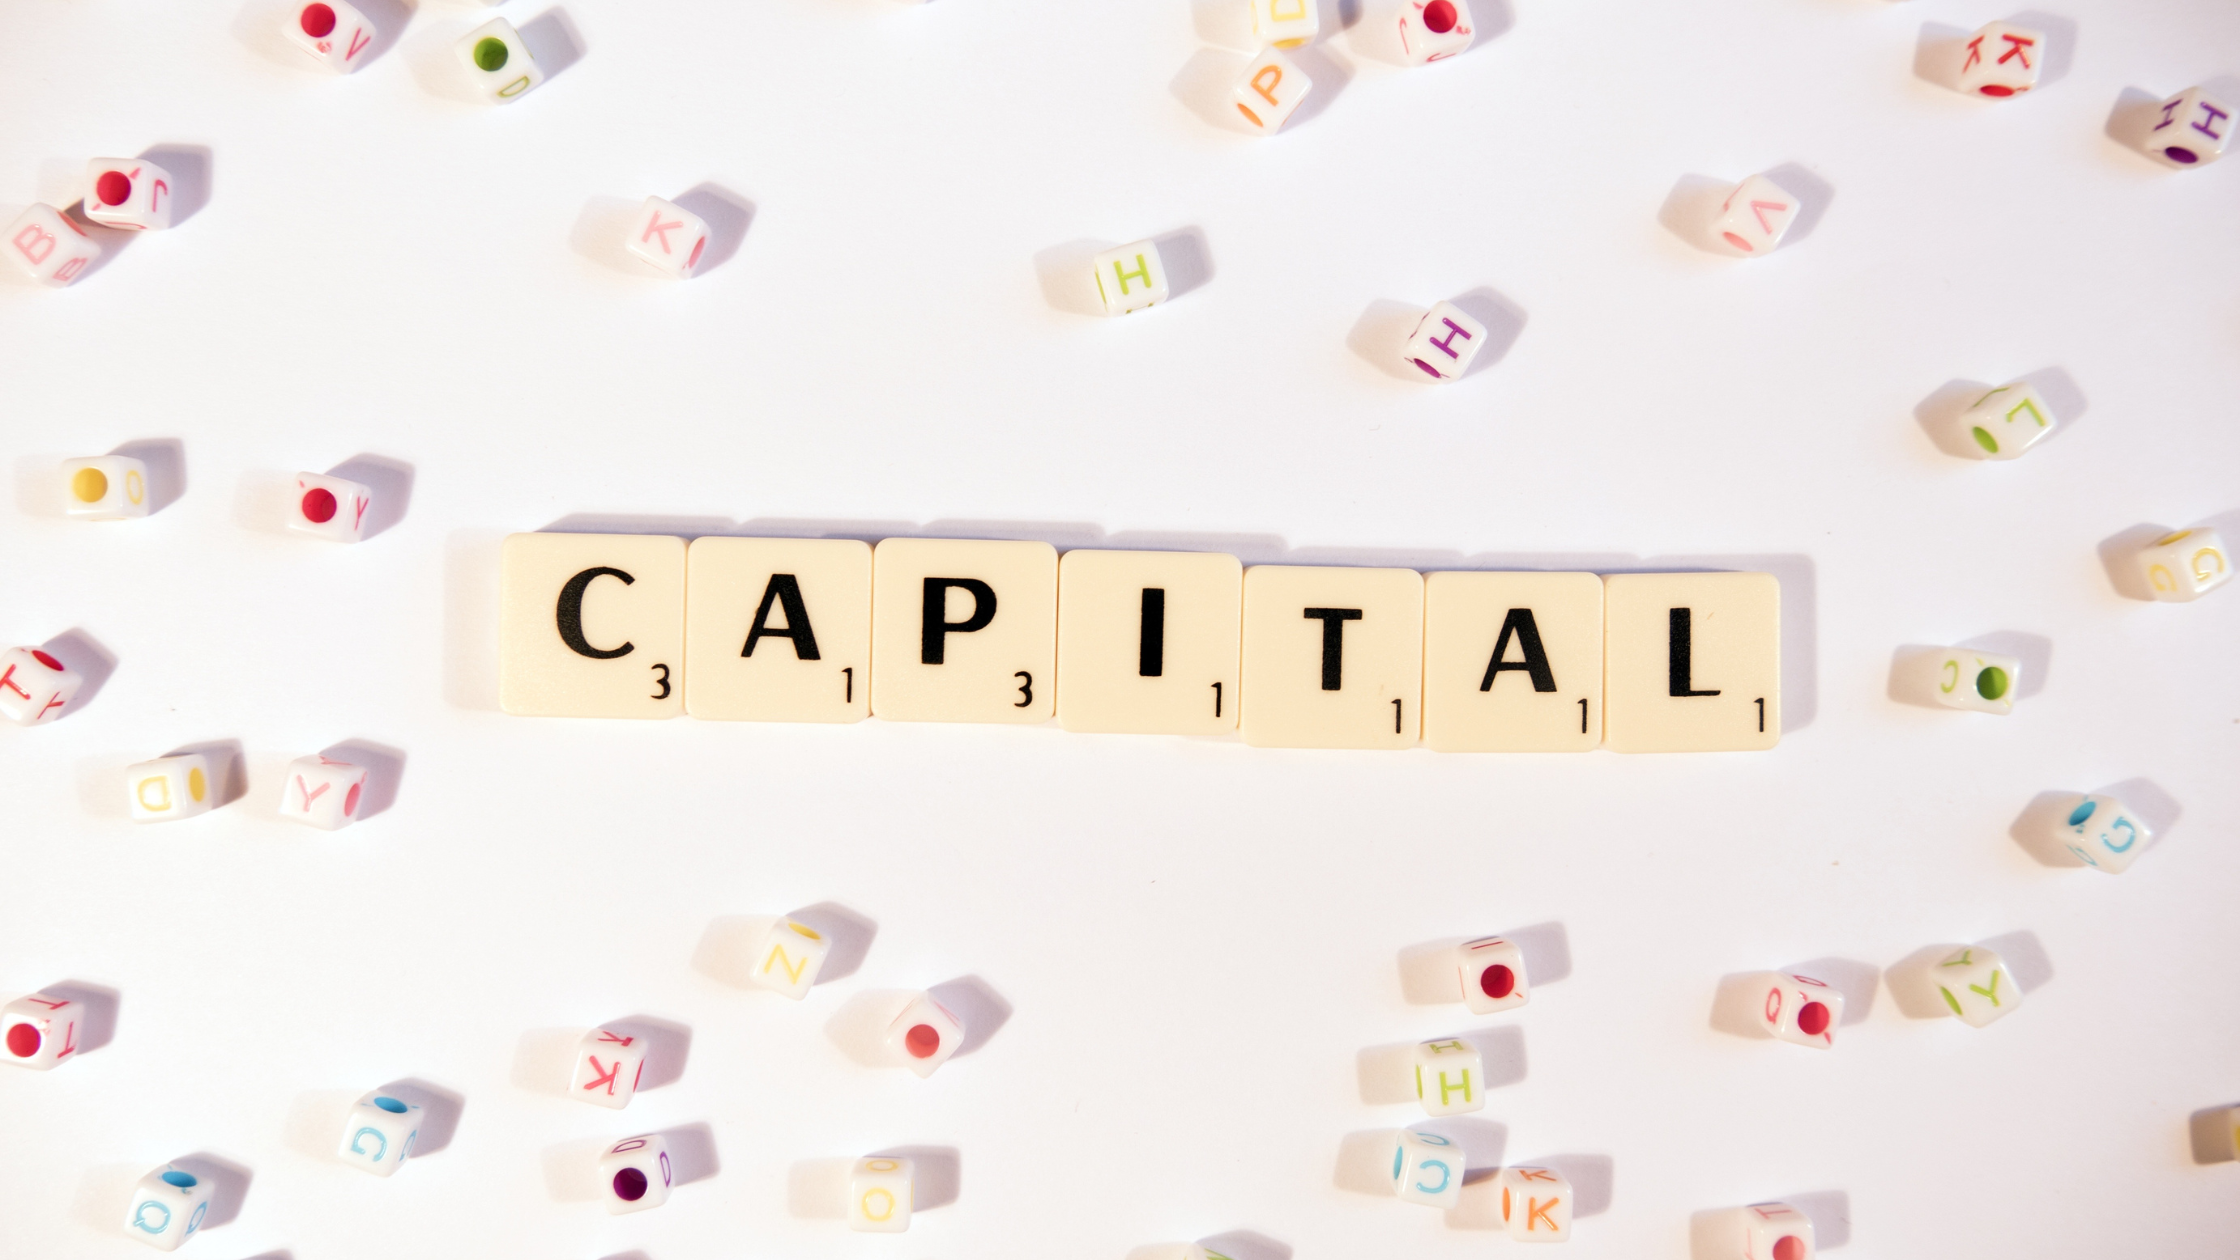 How can I raise capital for my business?